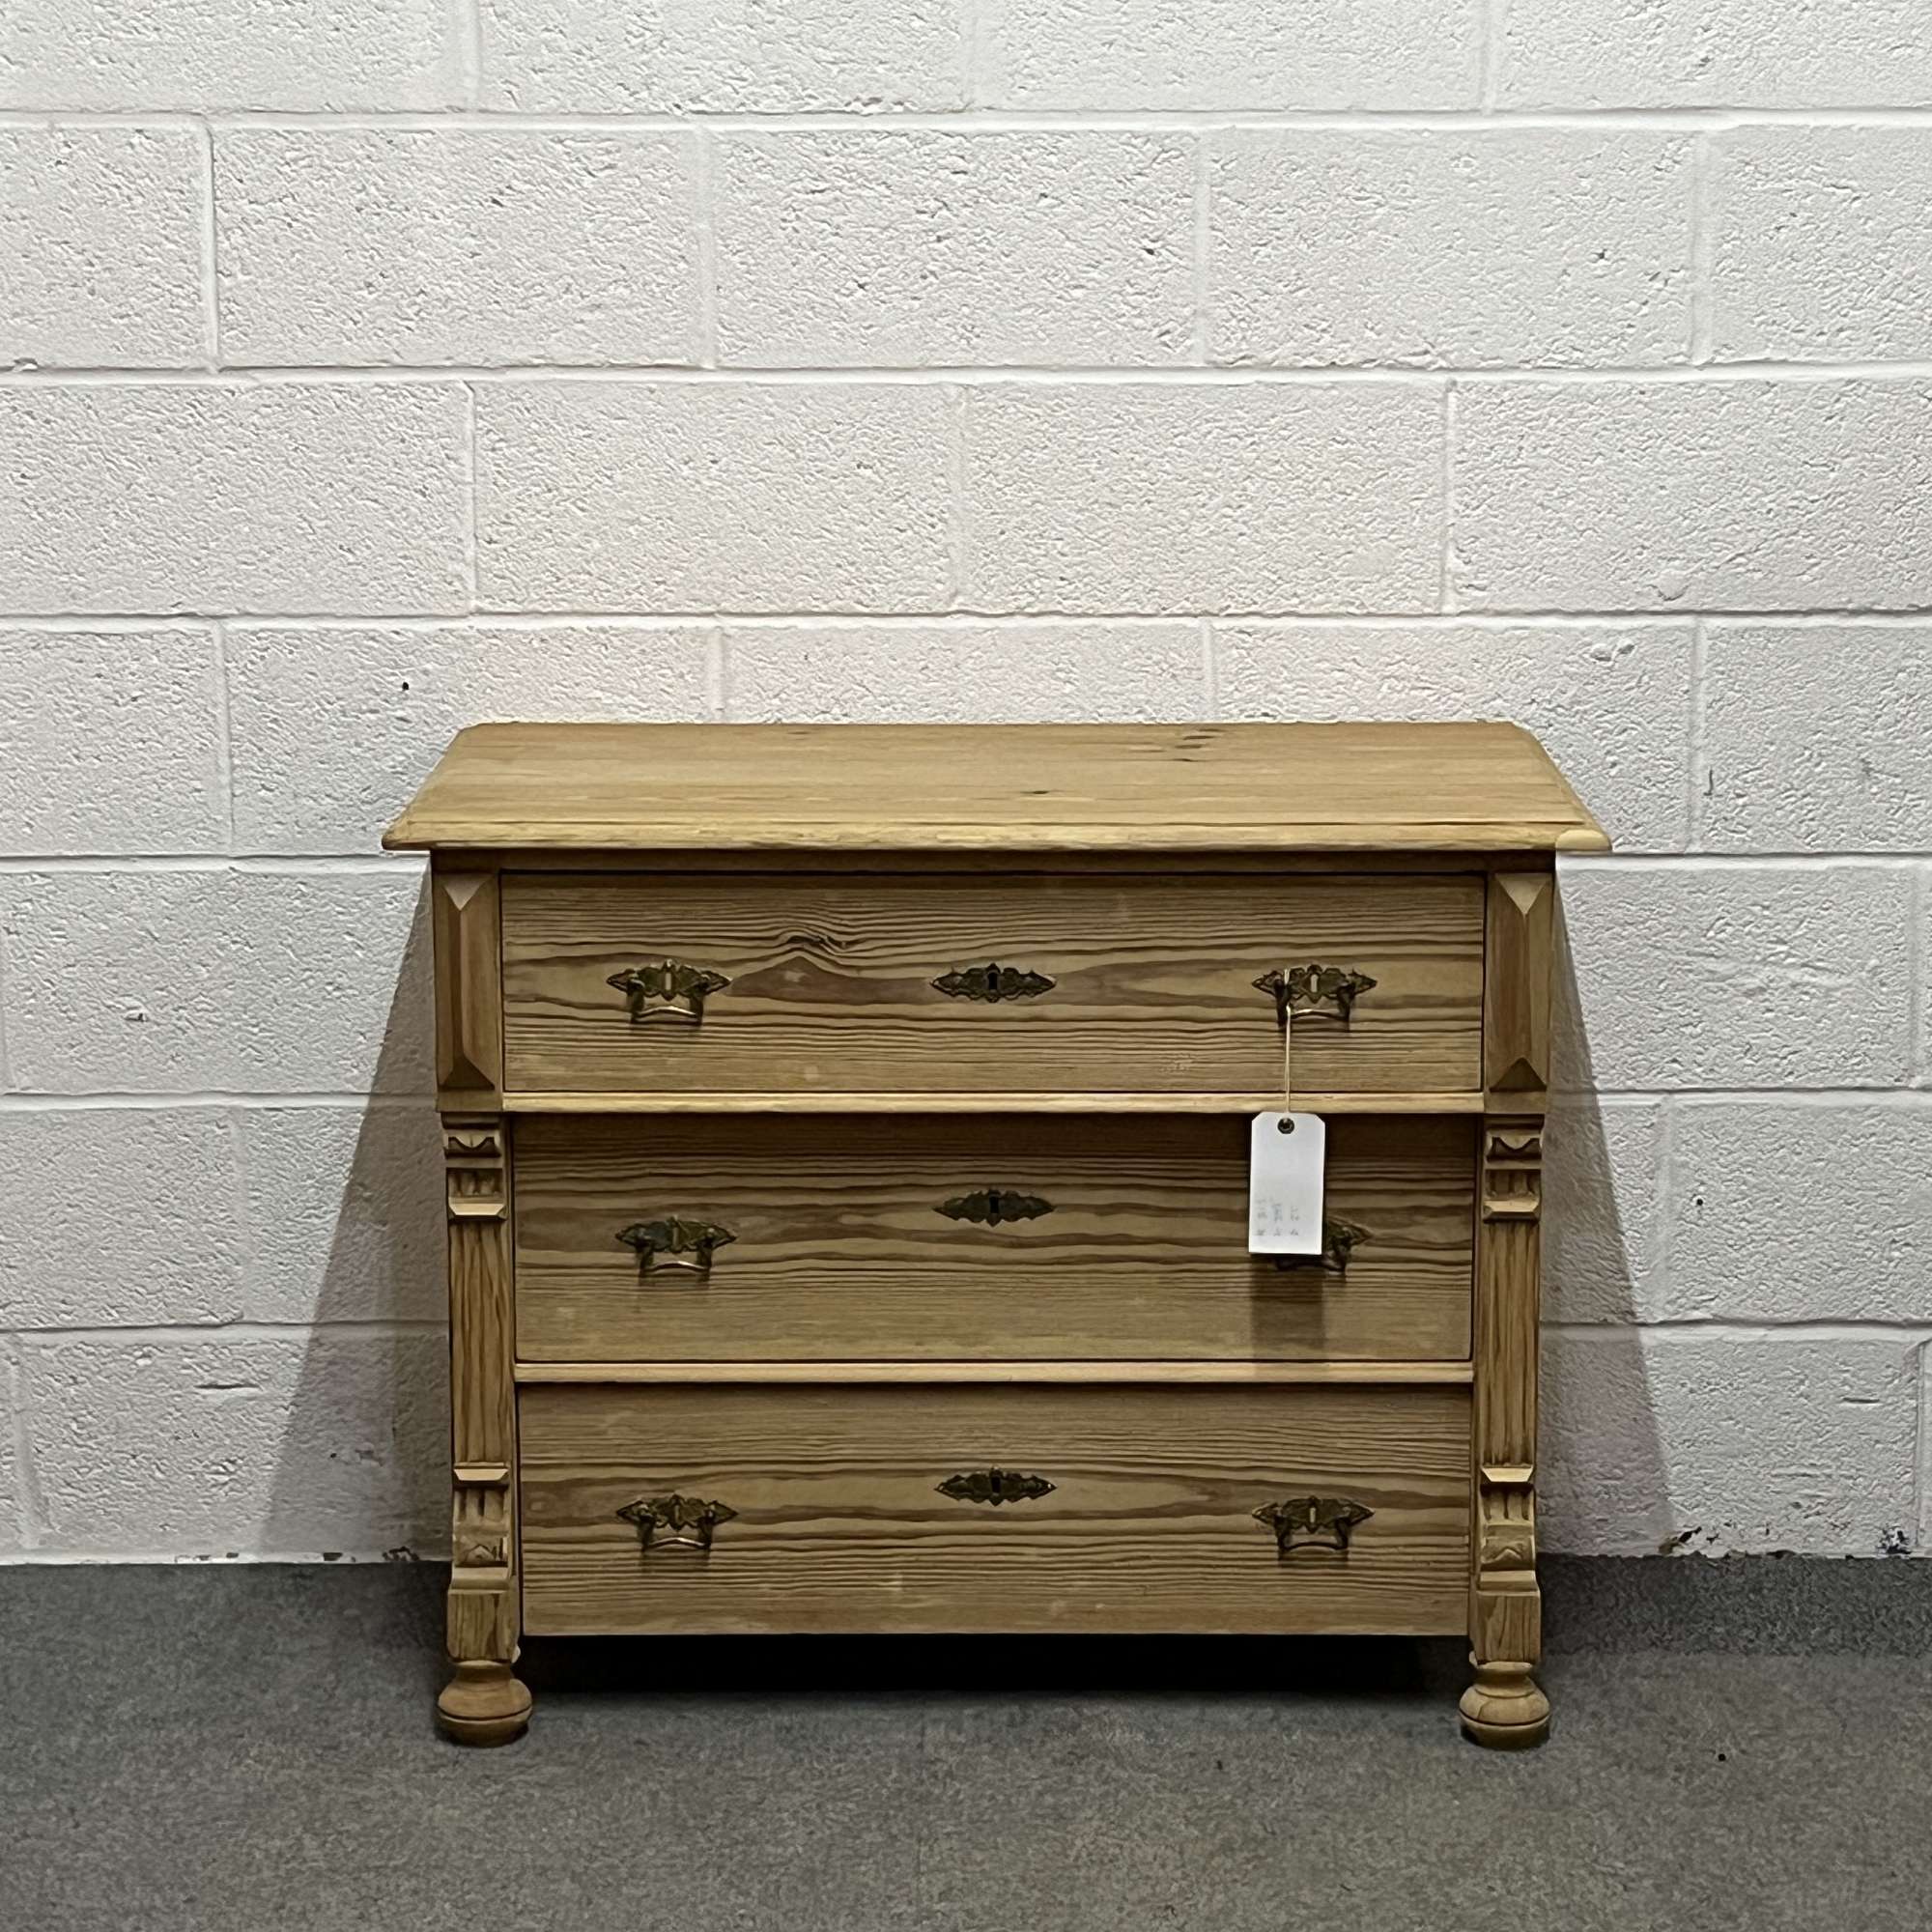 East German Antique Pine Chest Of Drawers